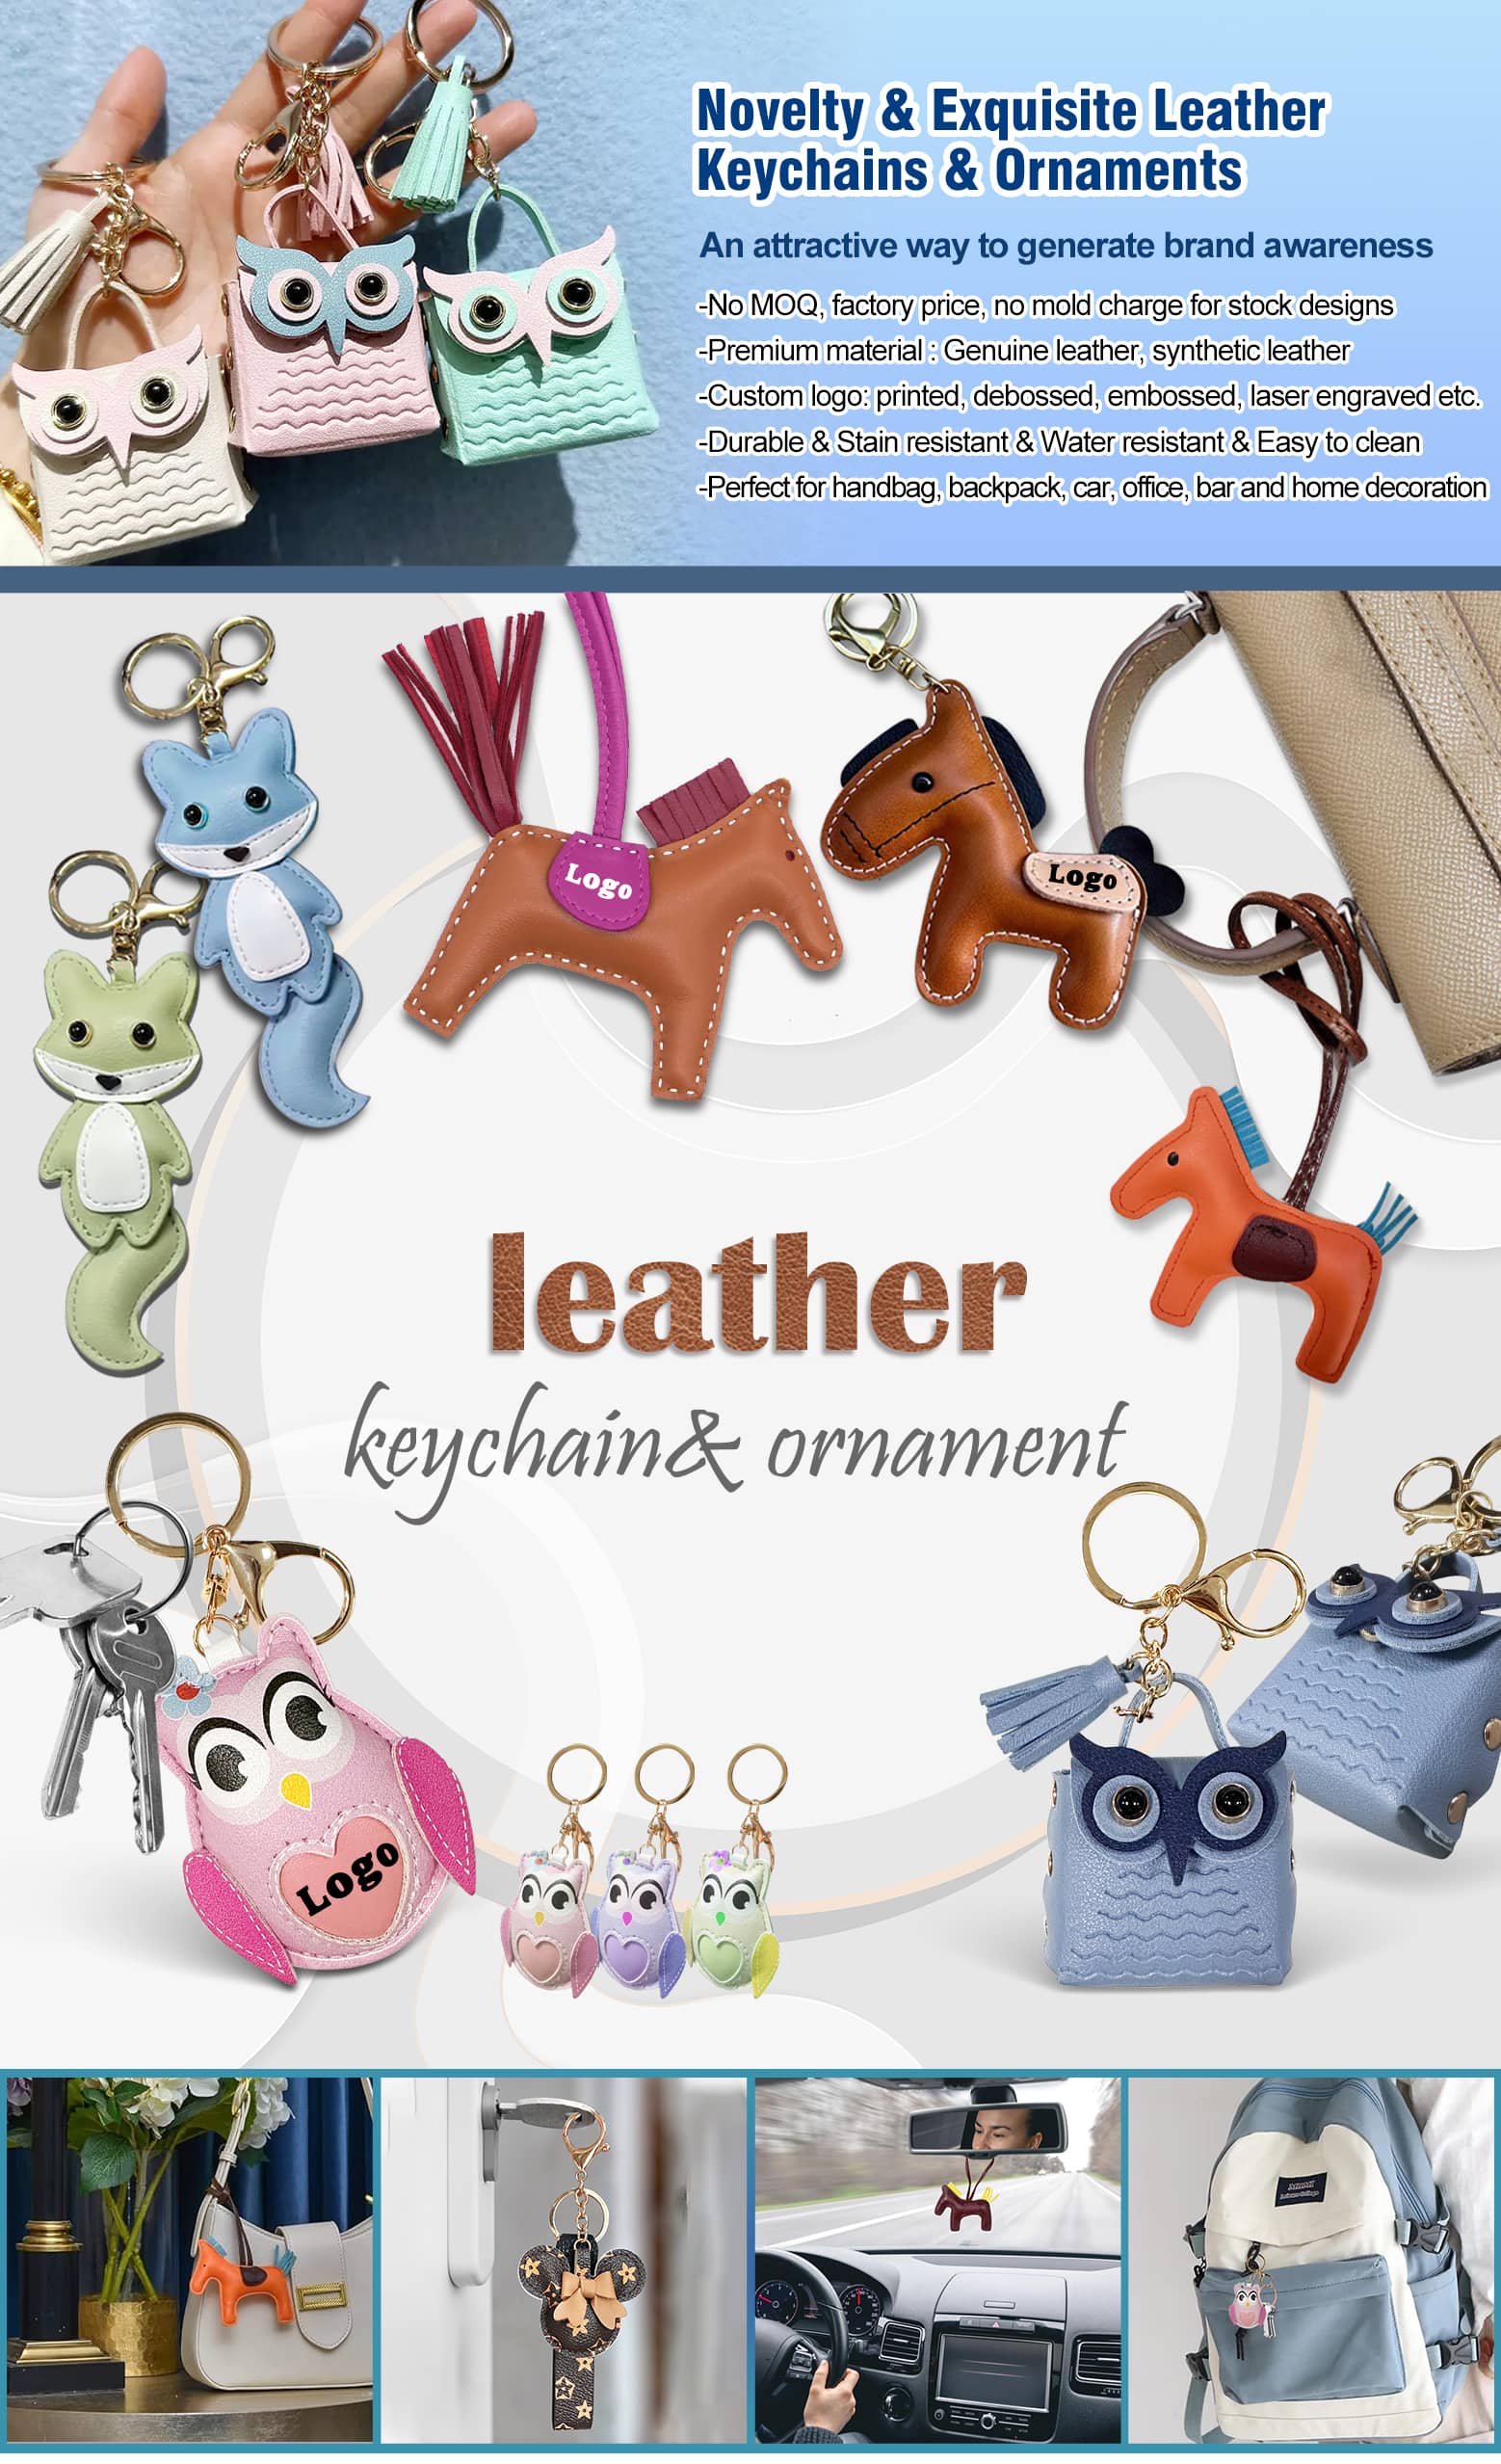 Novelty & Exquisite Leather Keychains & Ornaments